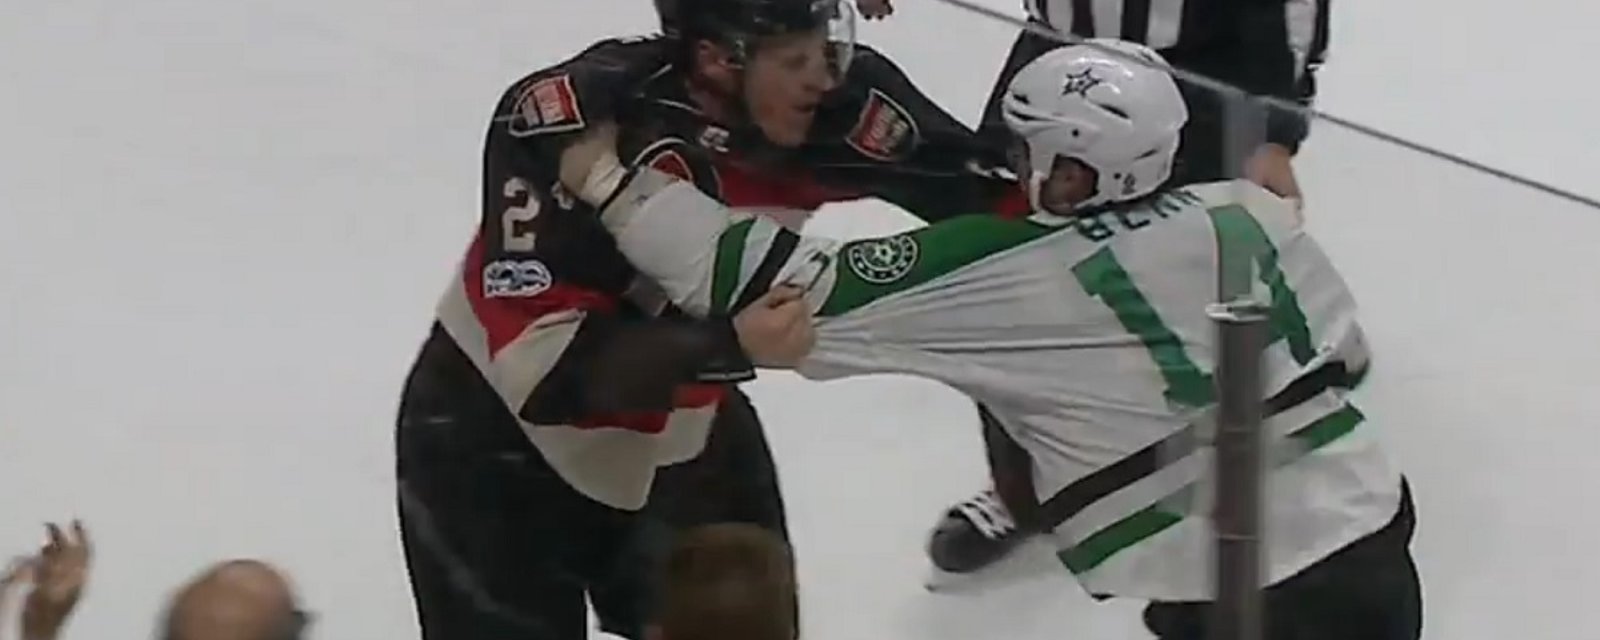 Phaneuf celebrates the anniversary of his trade with a goal and a fight against Jamie Benn!